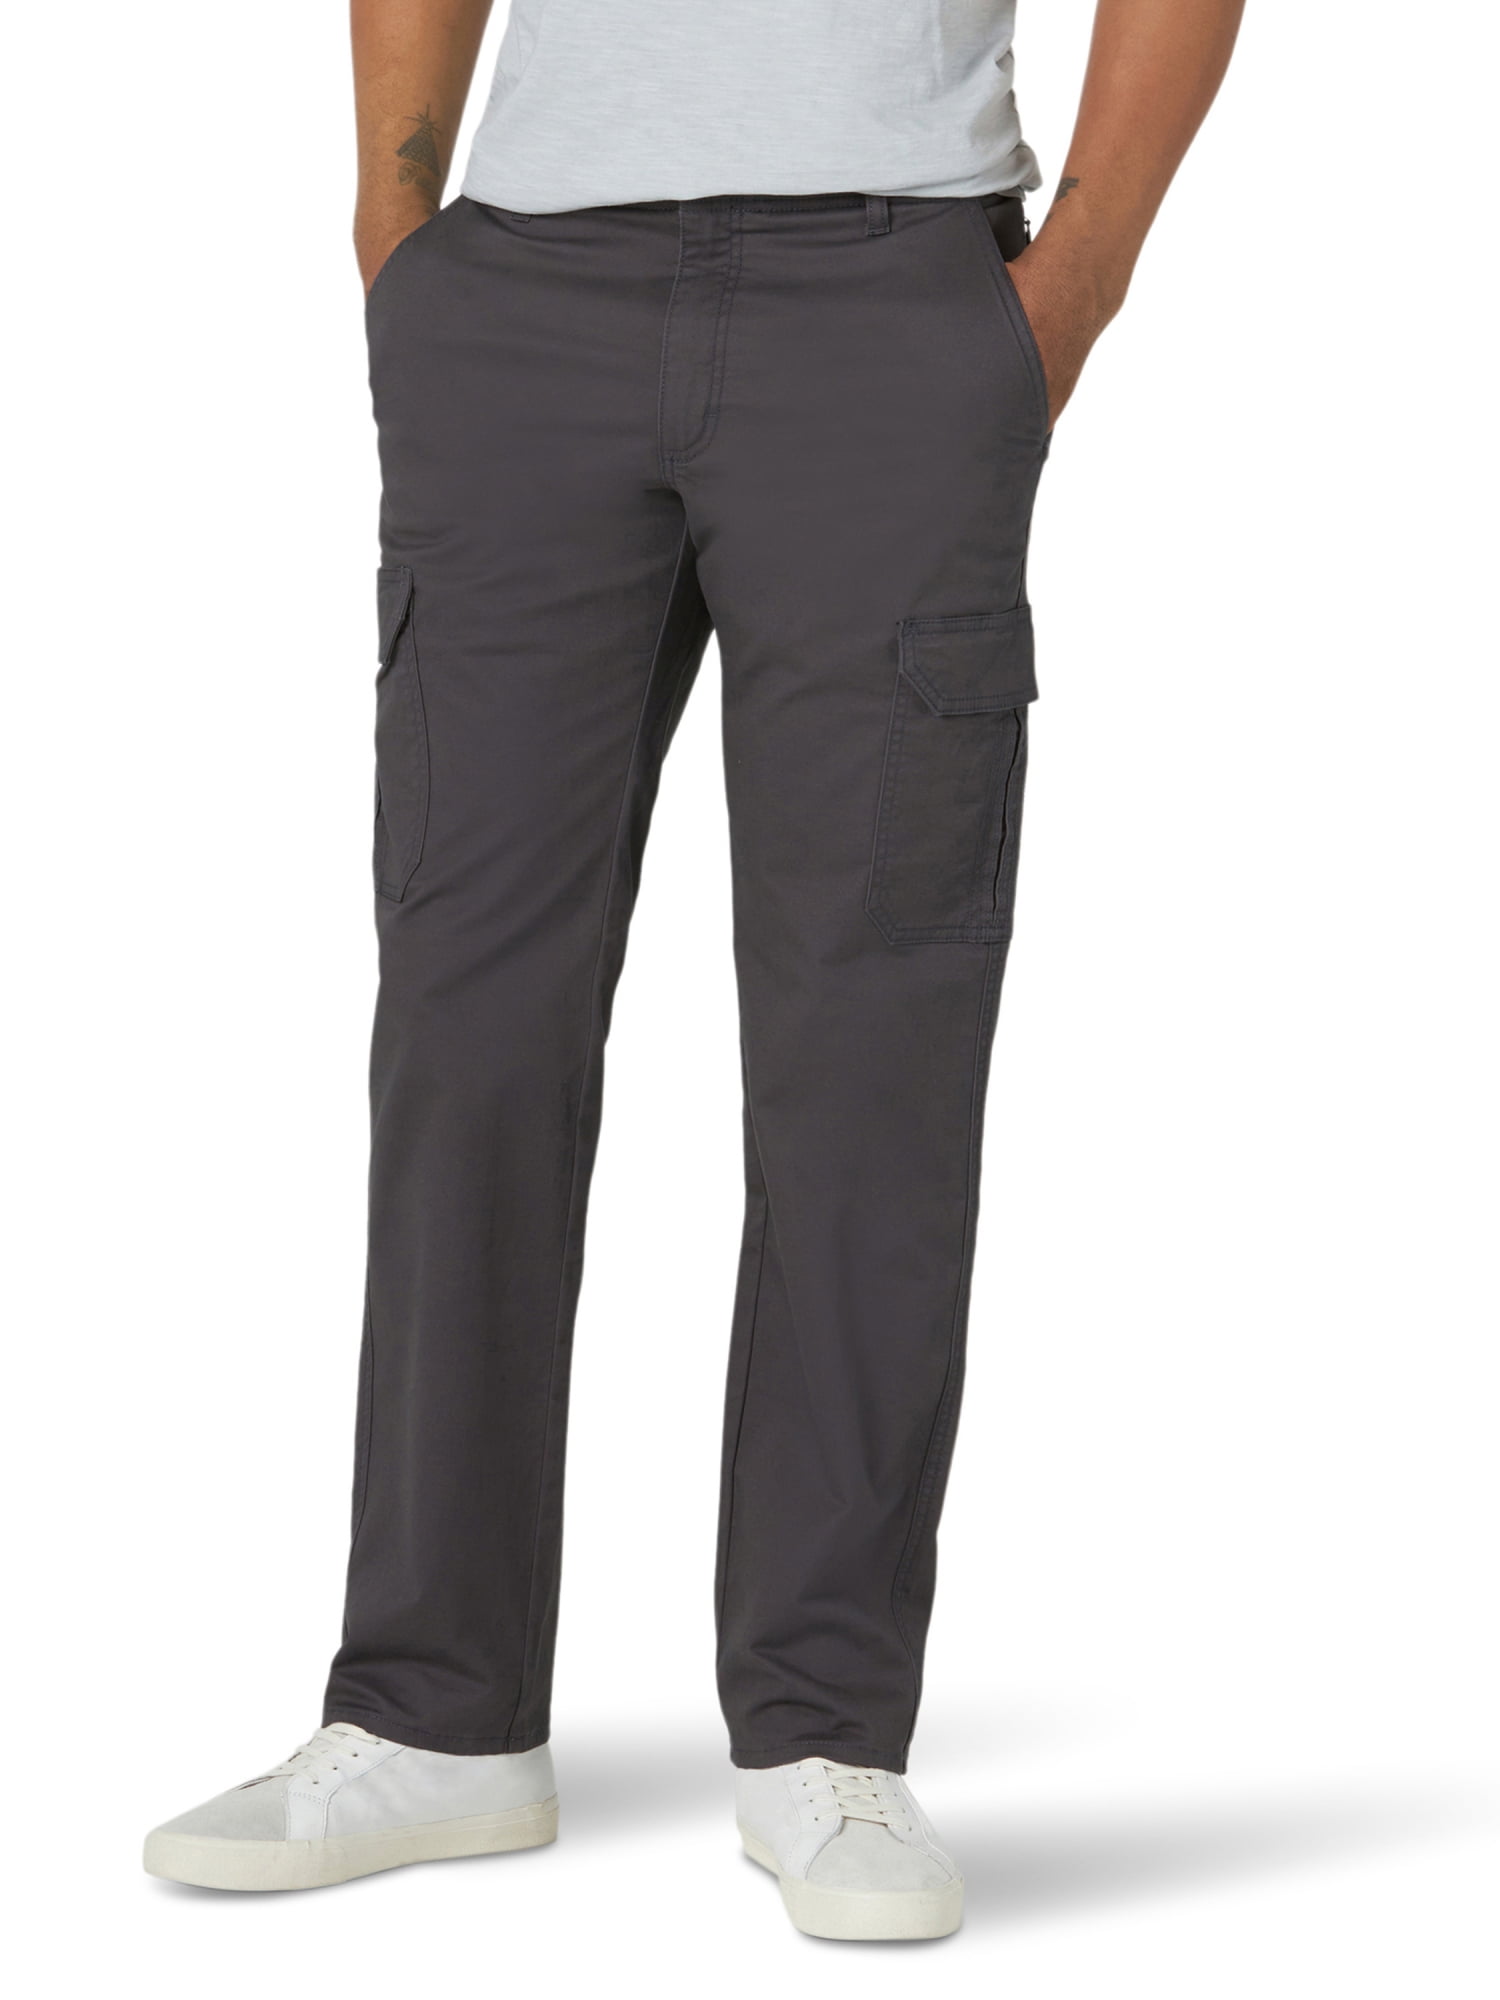 Lee Men's Extreme Comfort Cargo Twill Pant Straight Fit 